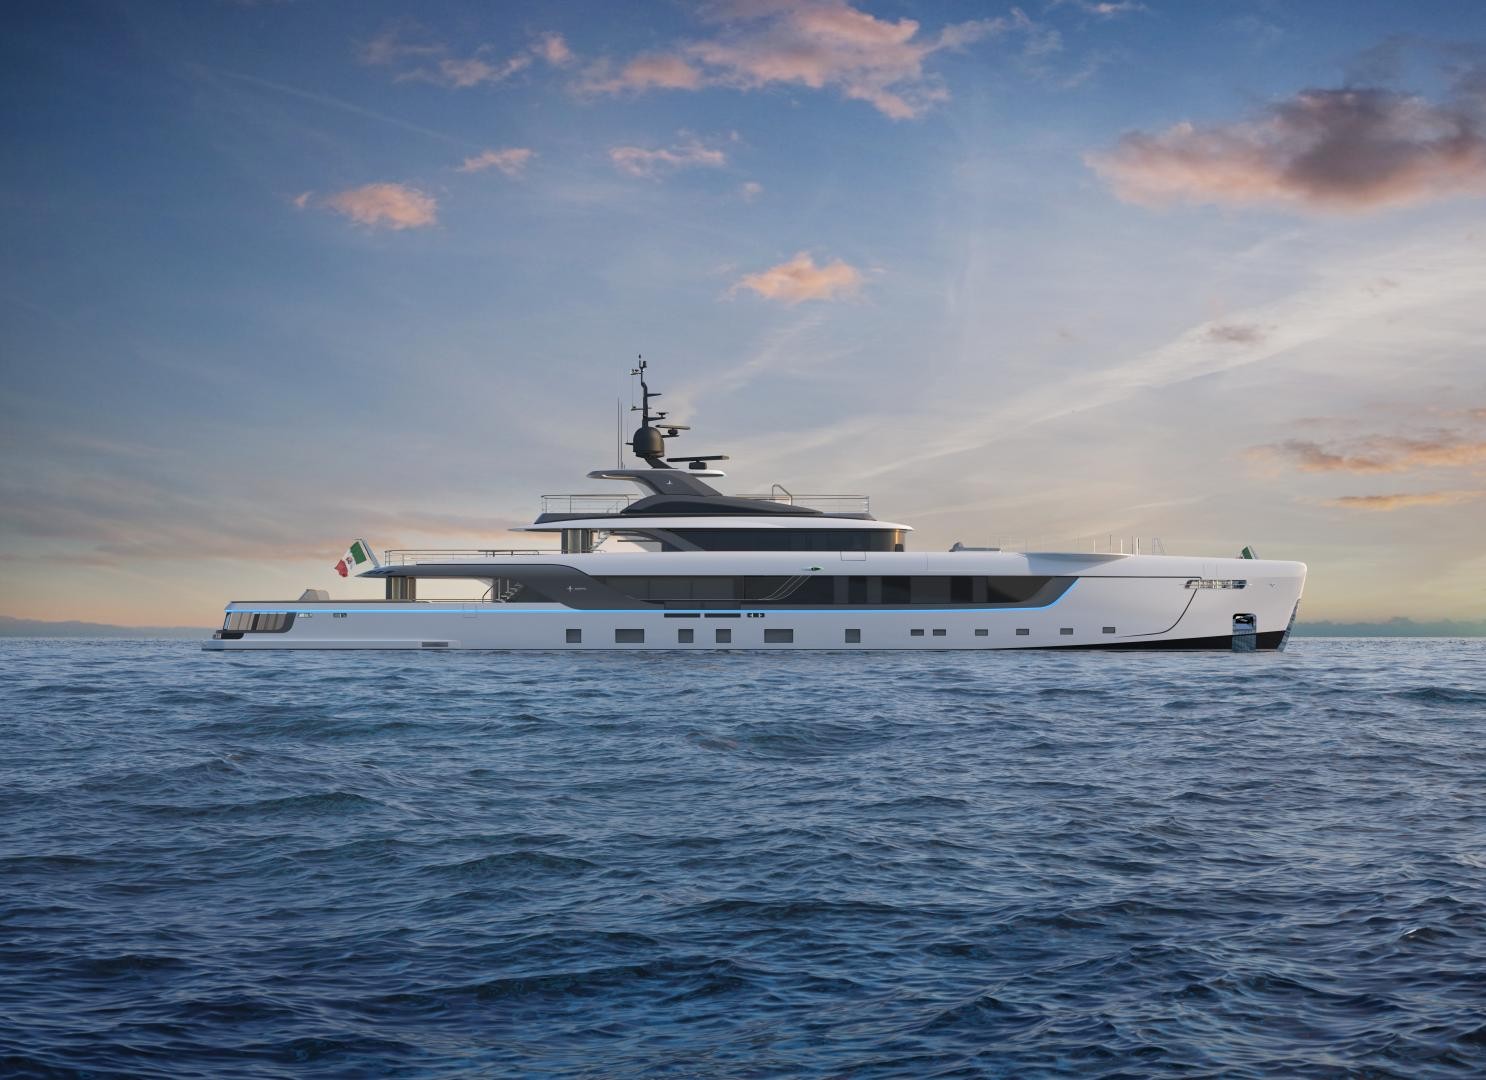 The Italian Sea Group announces the sale of a new 55-metre